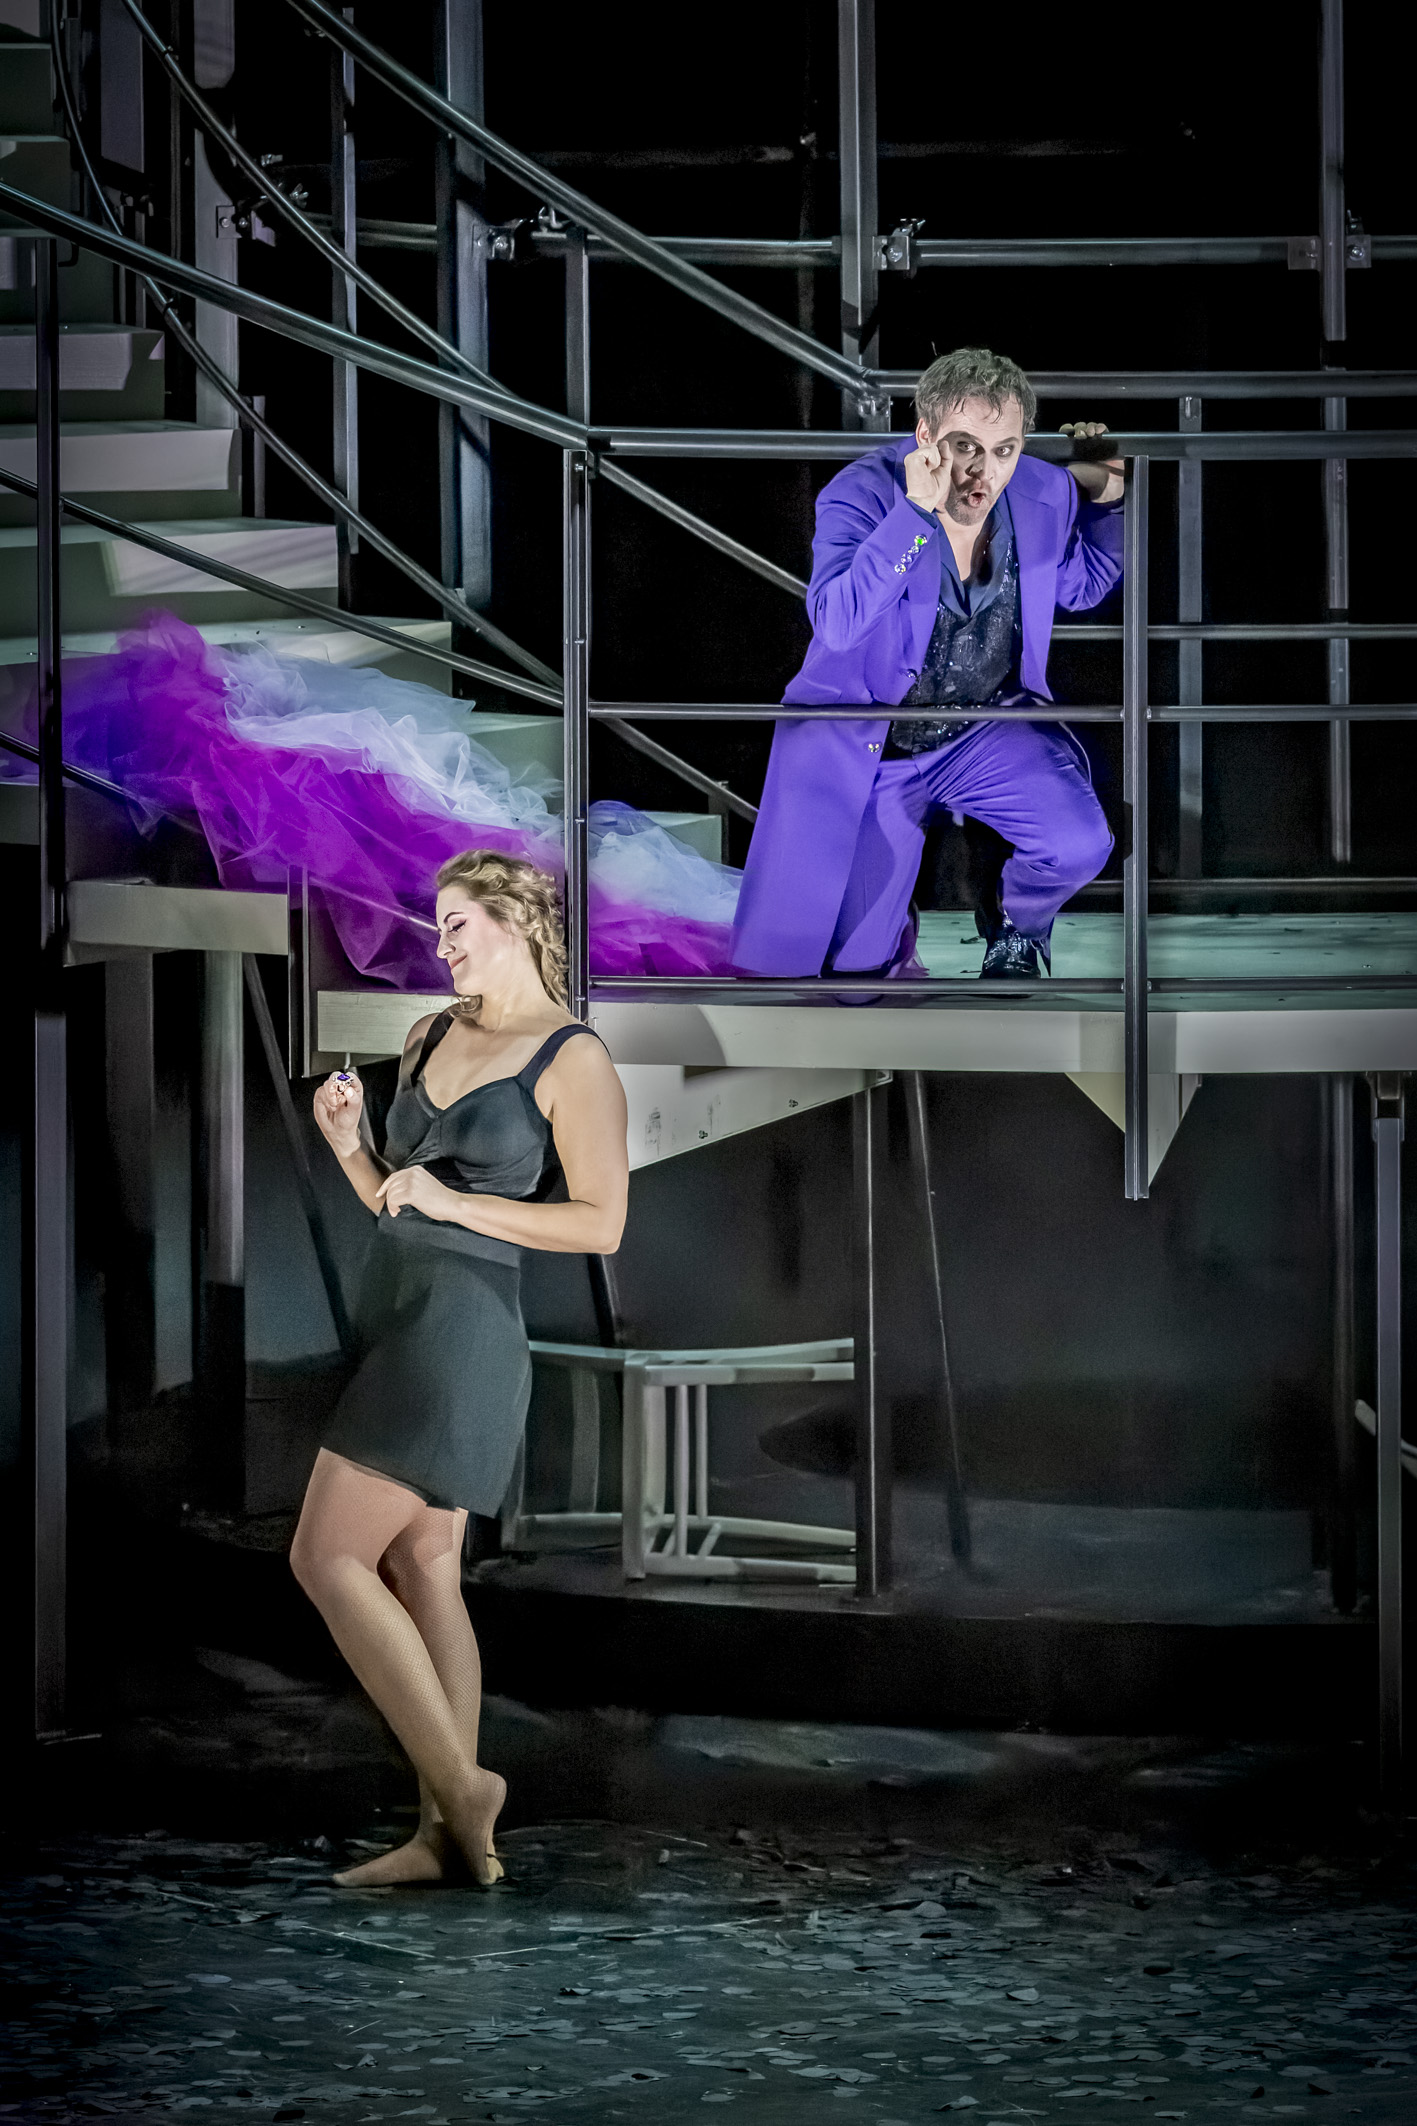 Jacquelyn Wagner (Salome), Florian Stern (Herodes)